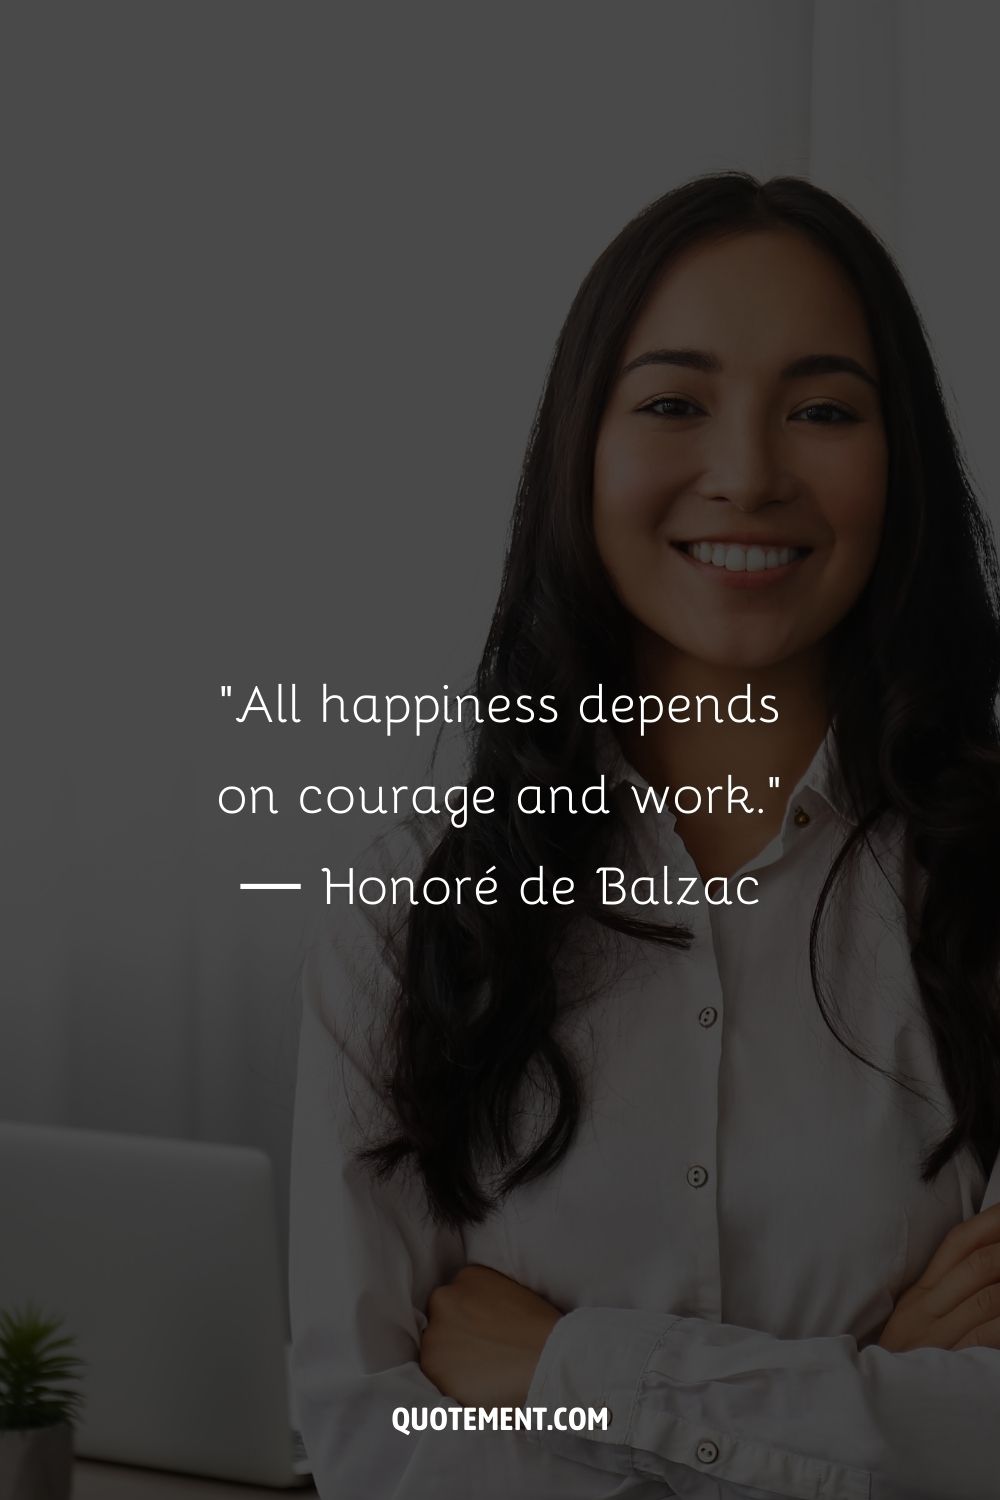 “All happiness depends on courage and work.” ― Honoré de Balzac